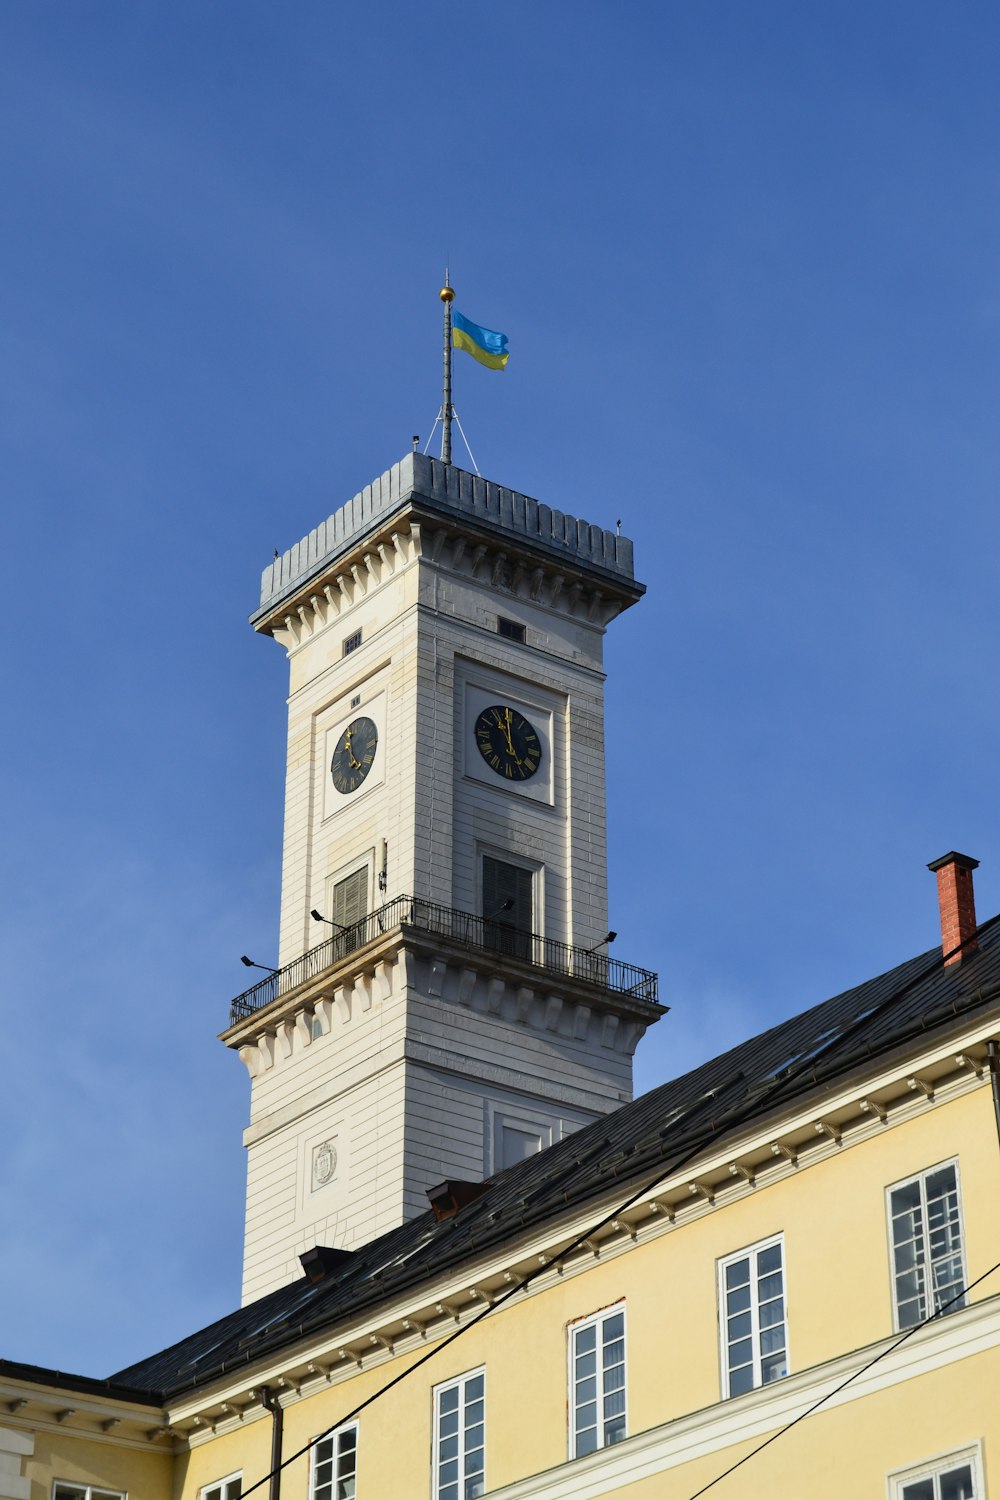 a clock tower on top of a building